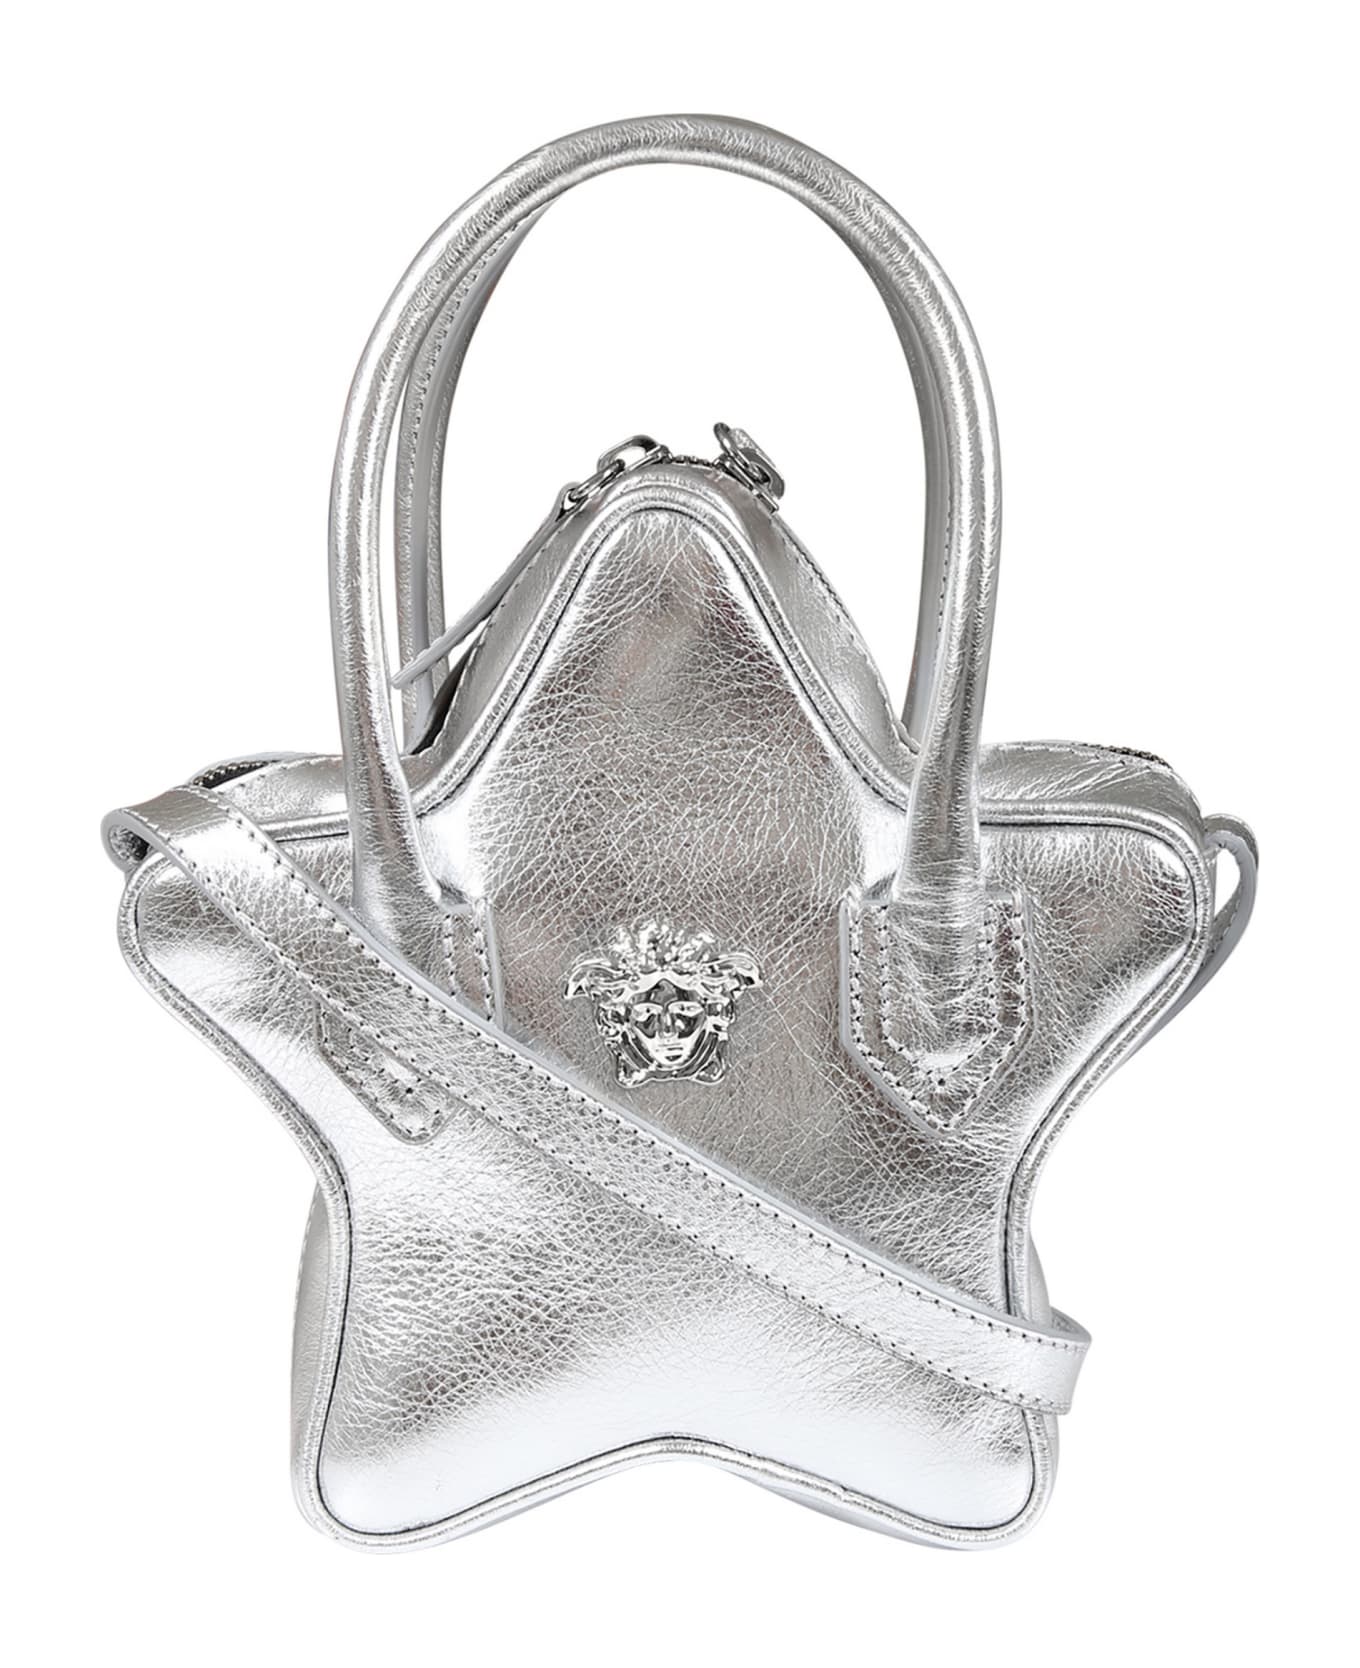 Young Versace Silver Bag For Girl With Medusa - P Argento Palladio